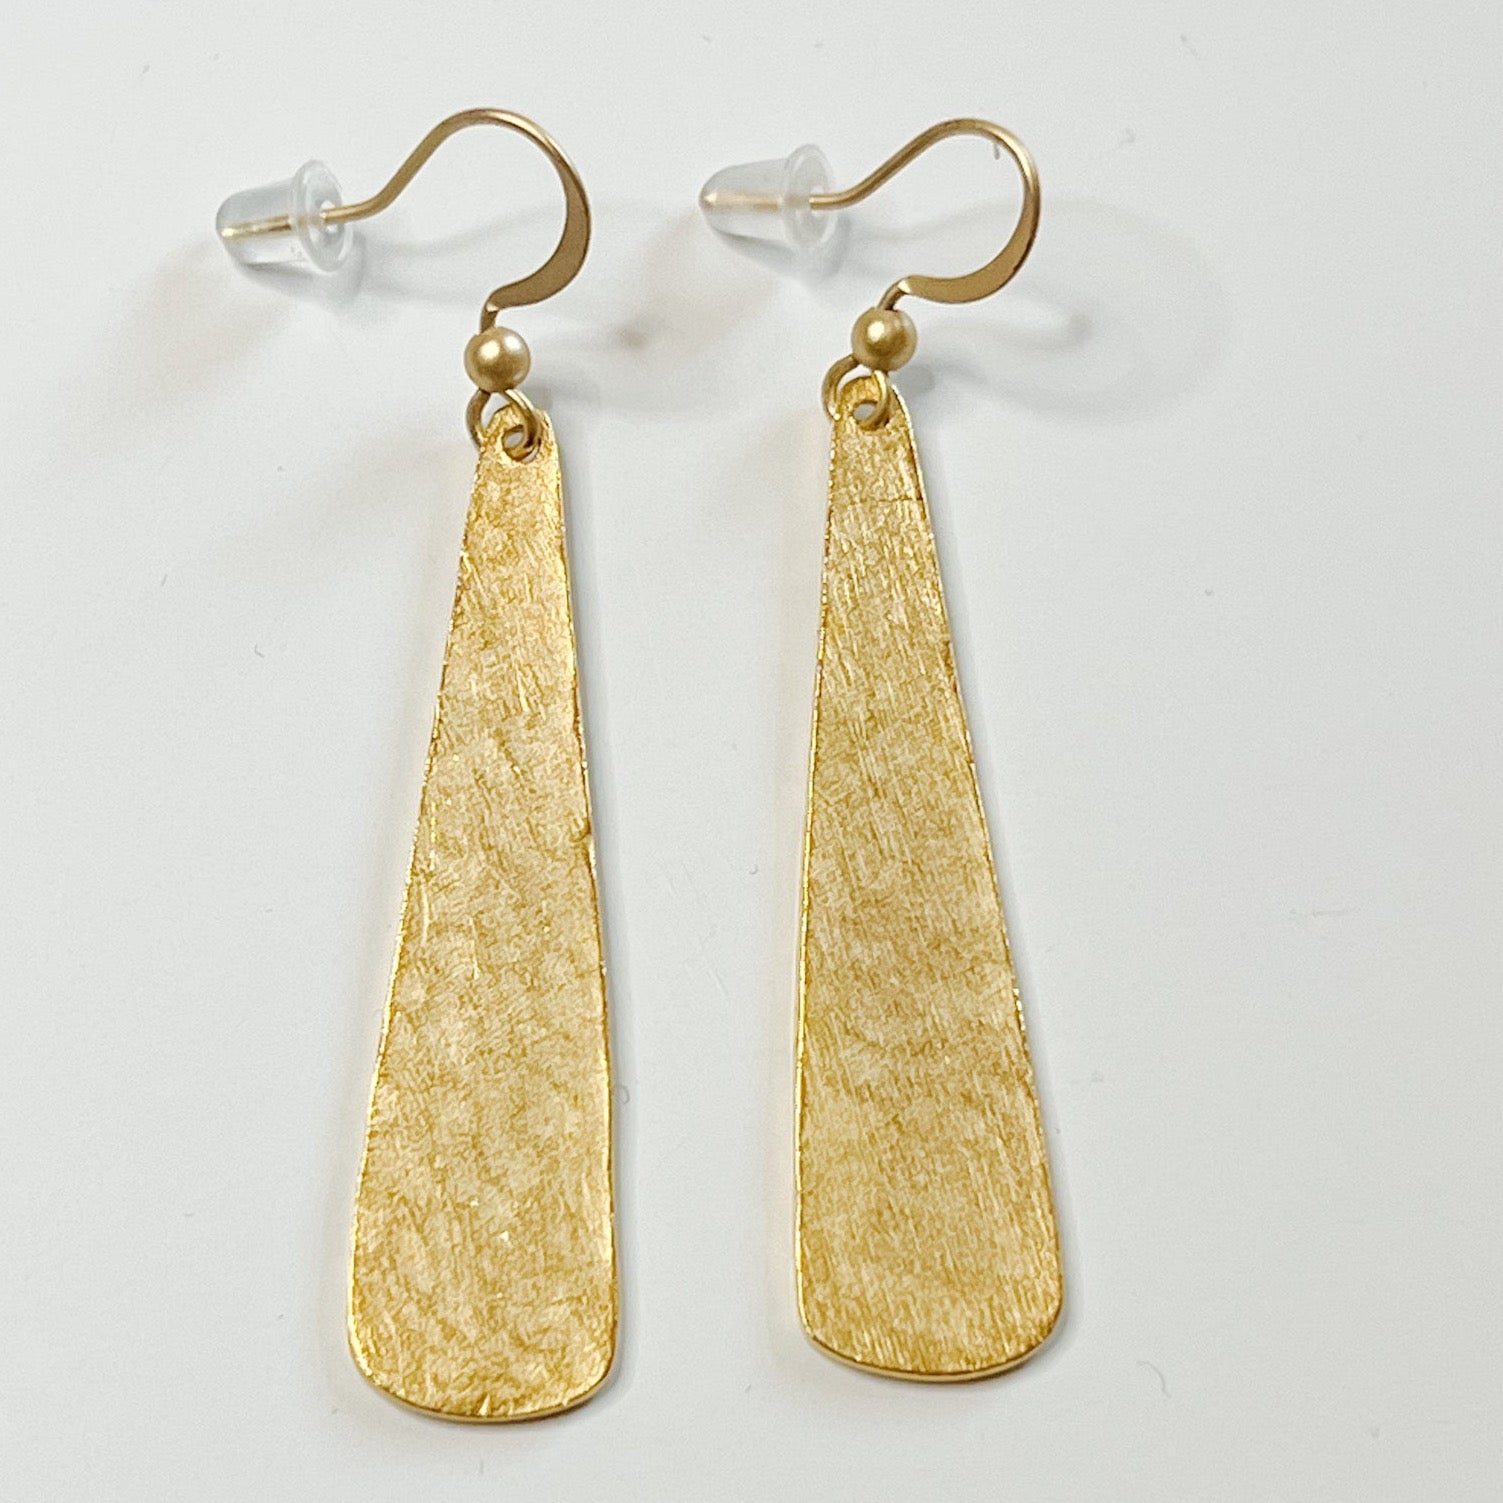 Earrings, Taylor - Danshire Market and Design 